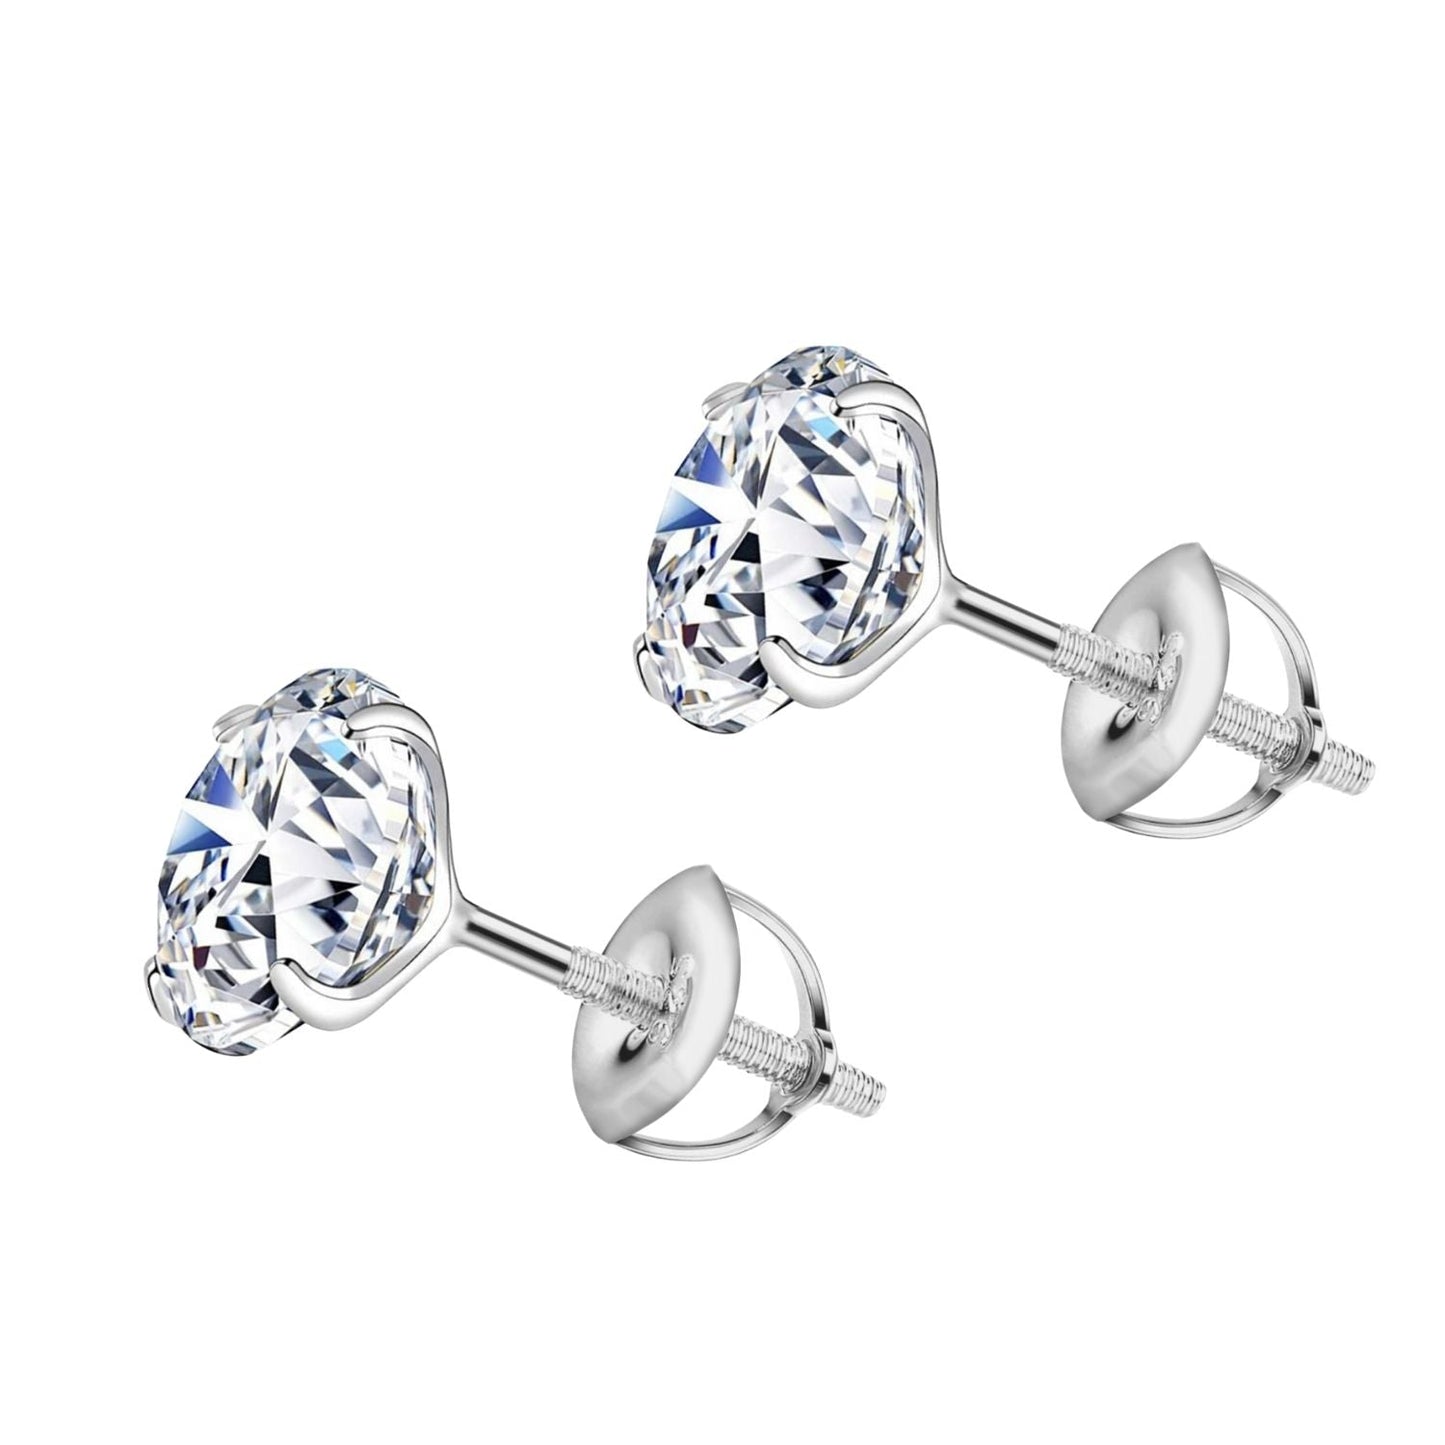 Screwback Solitaire Stud Earrings - 92.5 Silver - Round Cubic Zirconia Tops for everyday wear